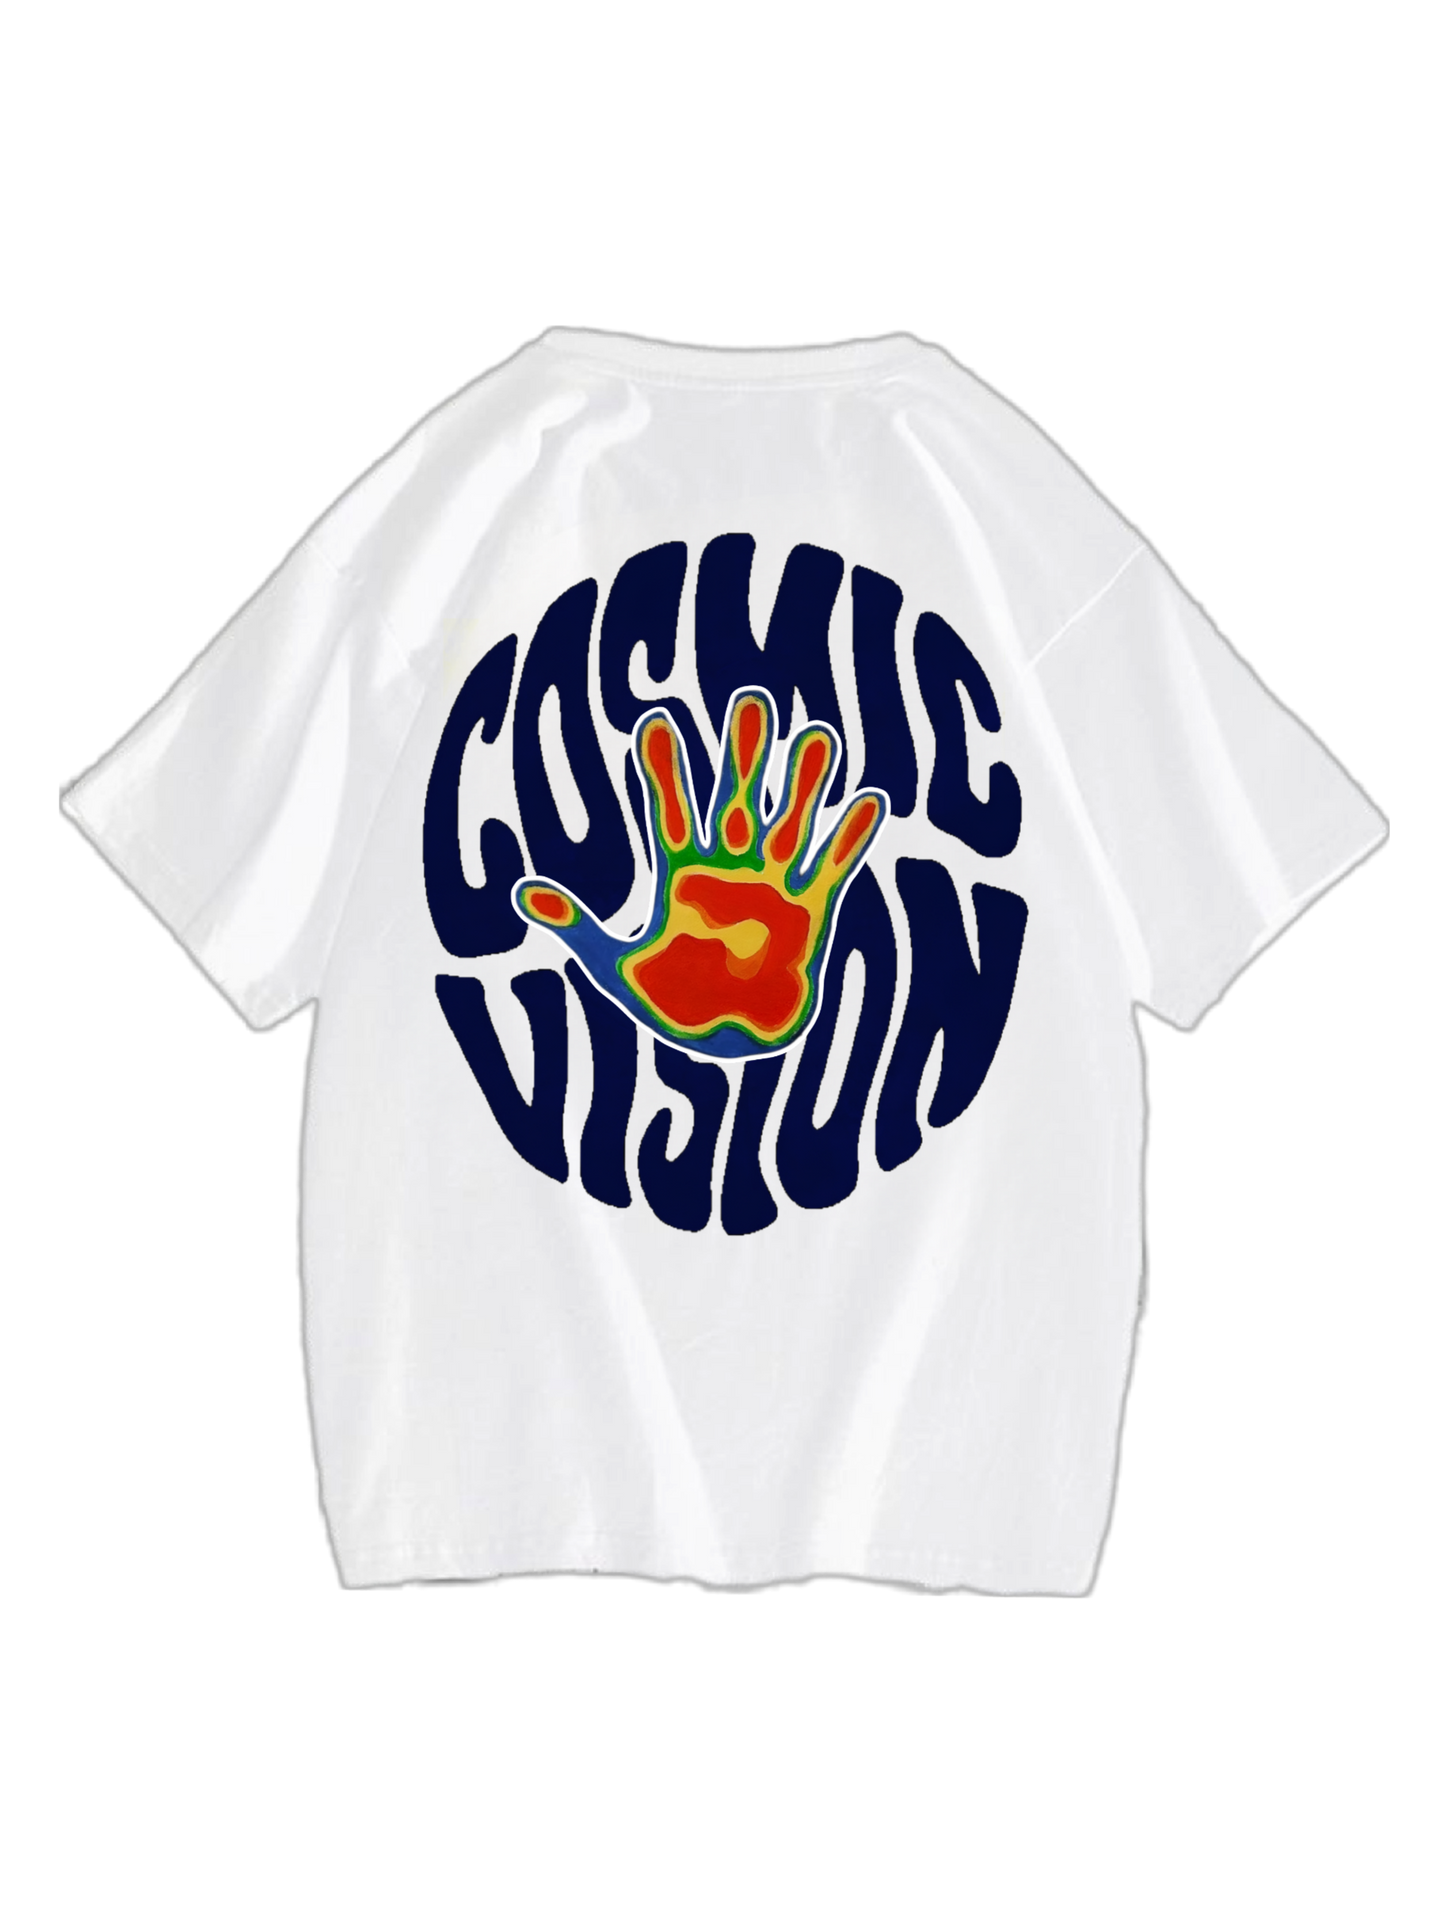 'Cosmic vision' graphic tee